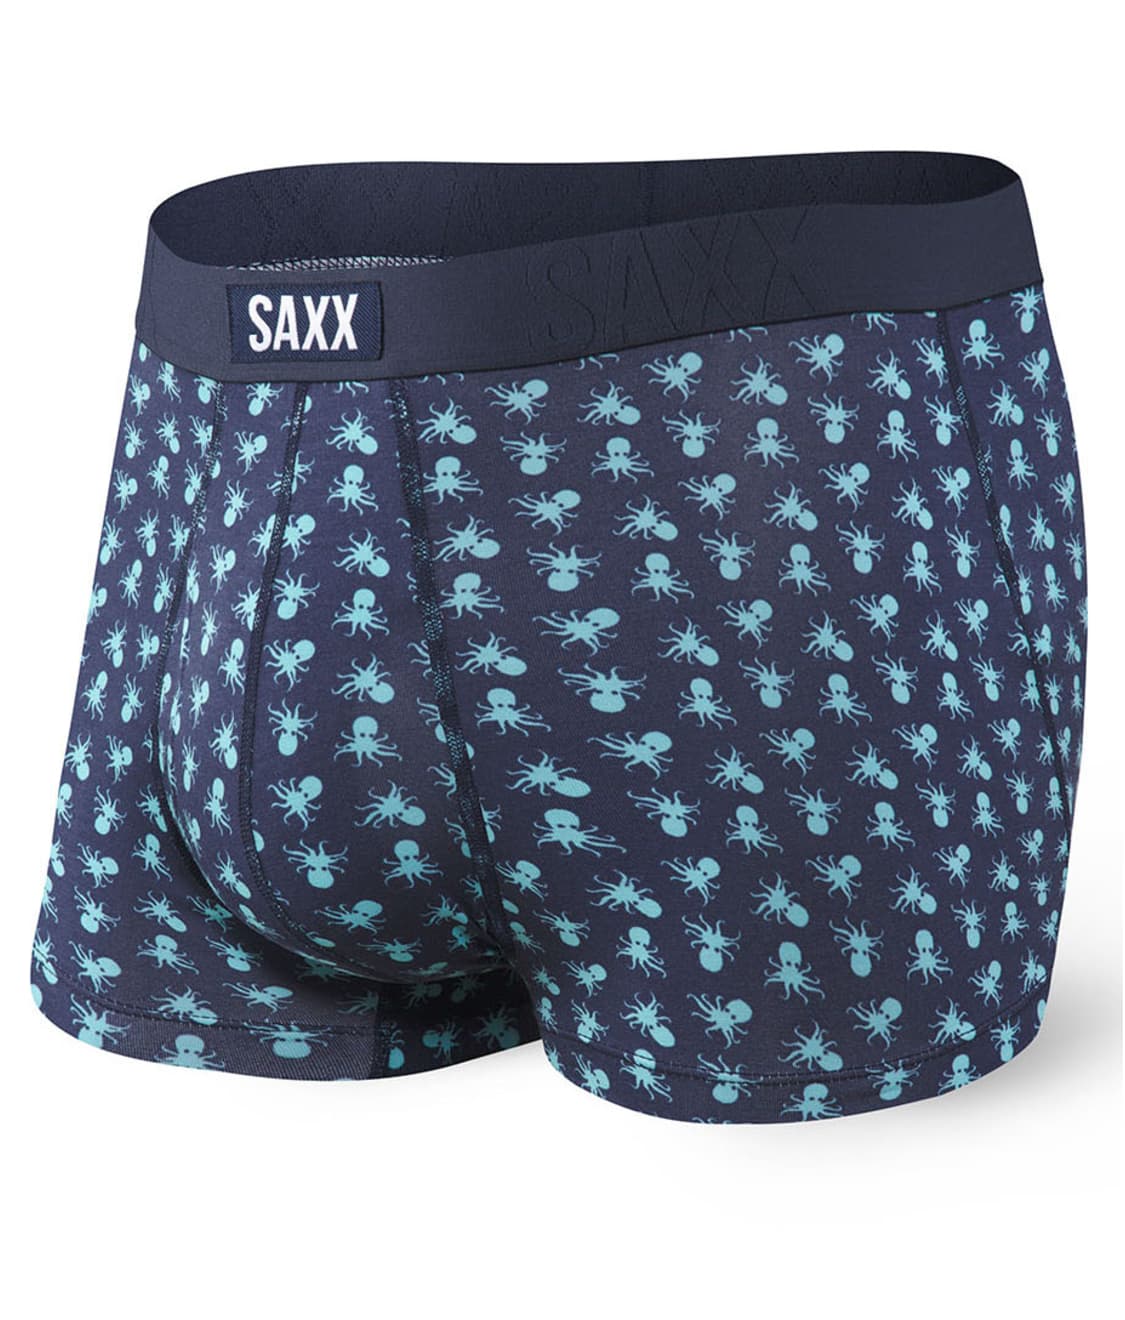 SAXX Undercover Modal Trunk & Reviews | Bare Necessities (Style SXTR19F)